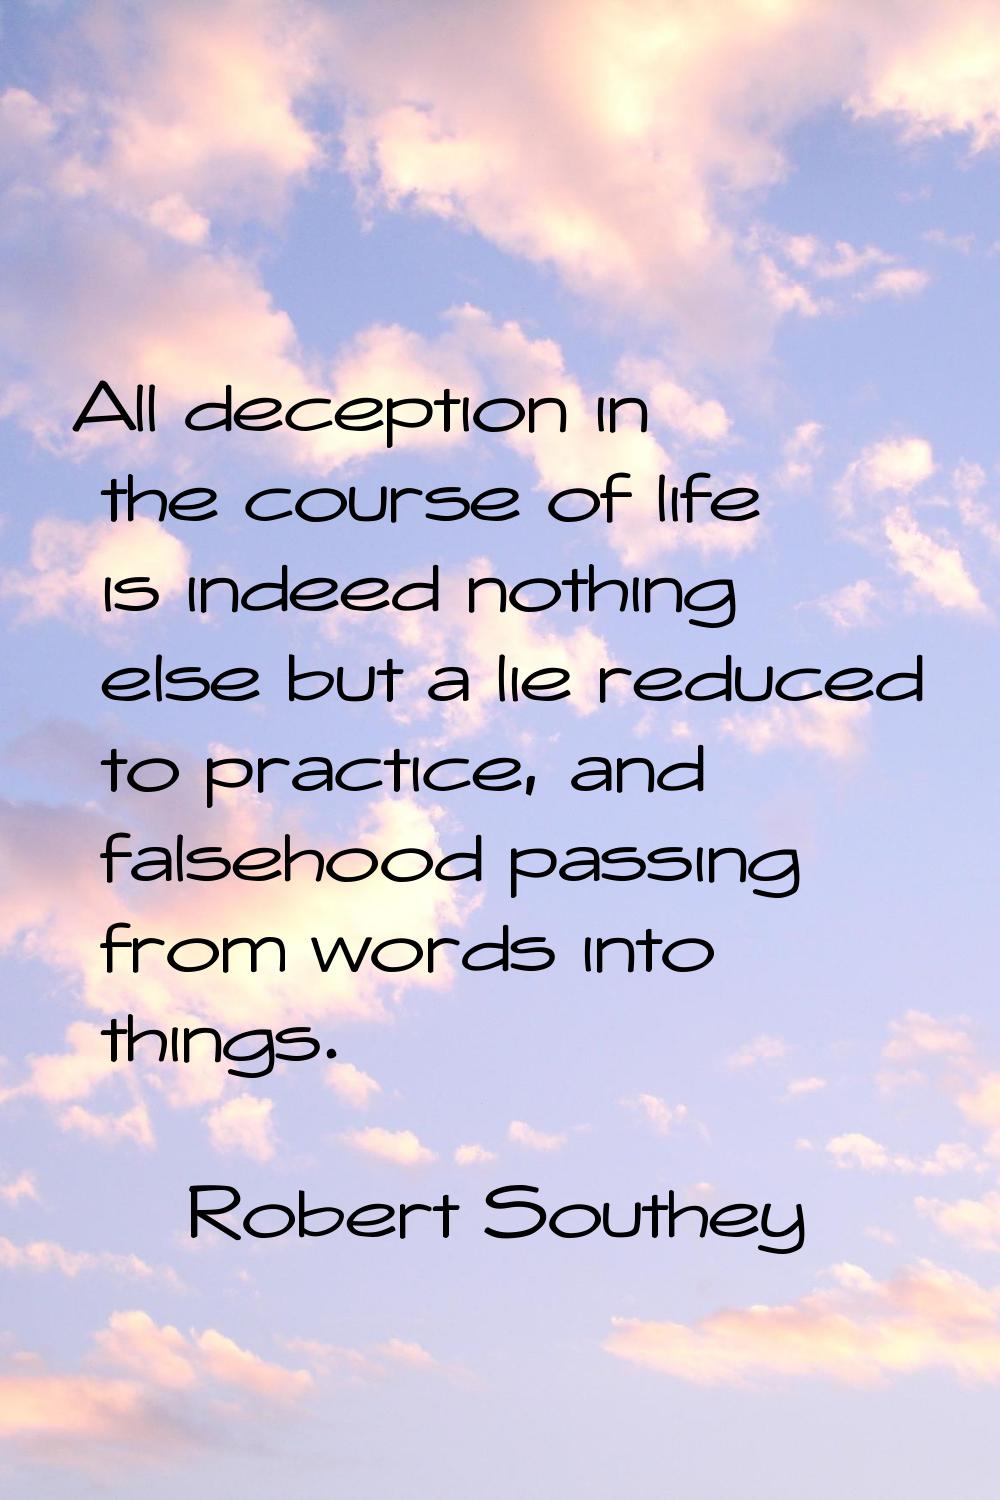 All deception in the course of life is indeed nothing else but a lie reduced to practice, and false